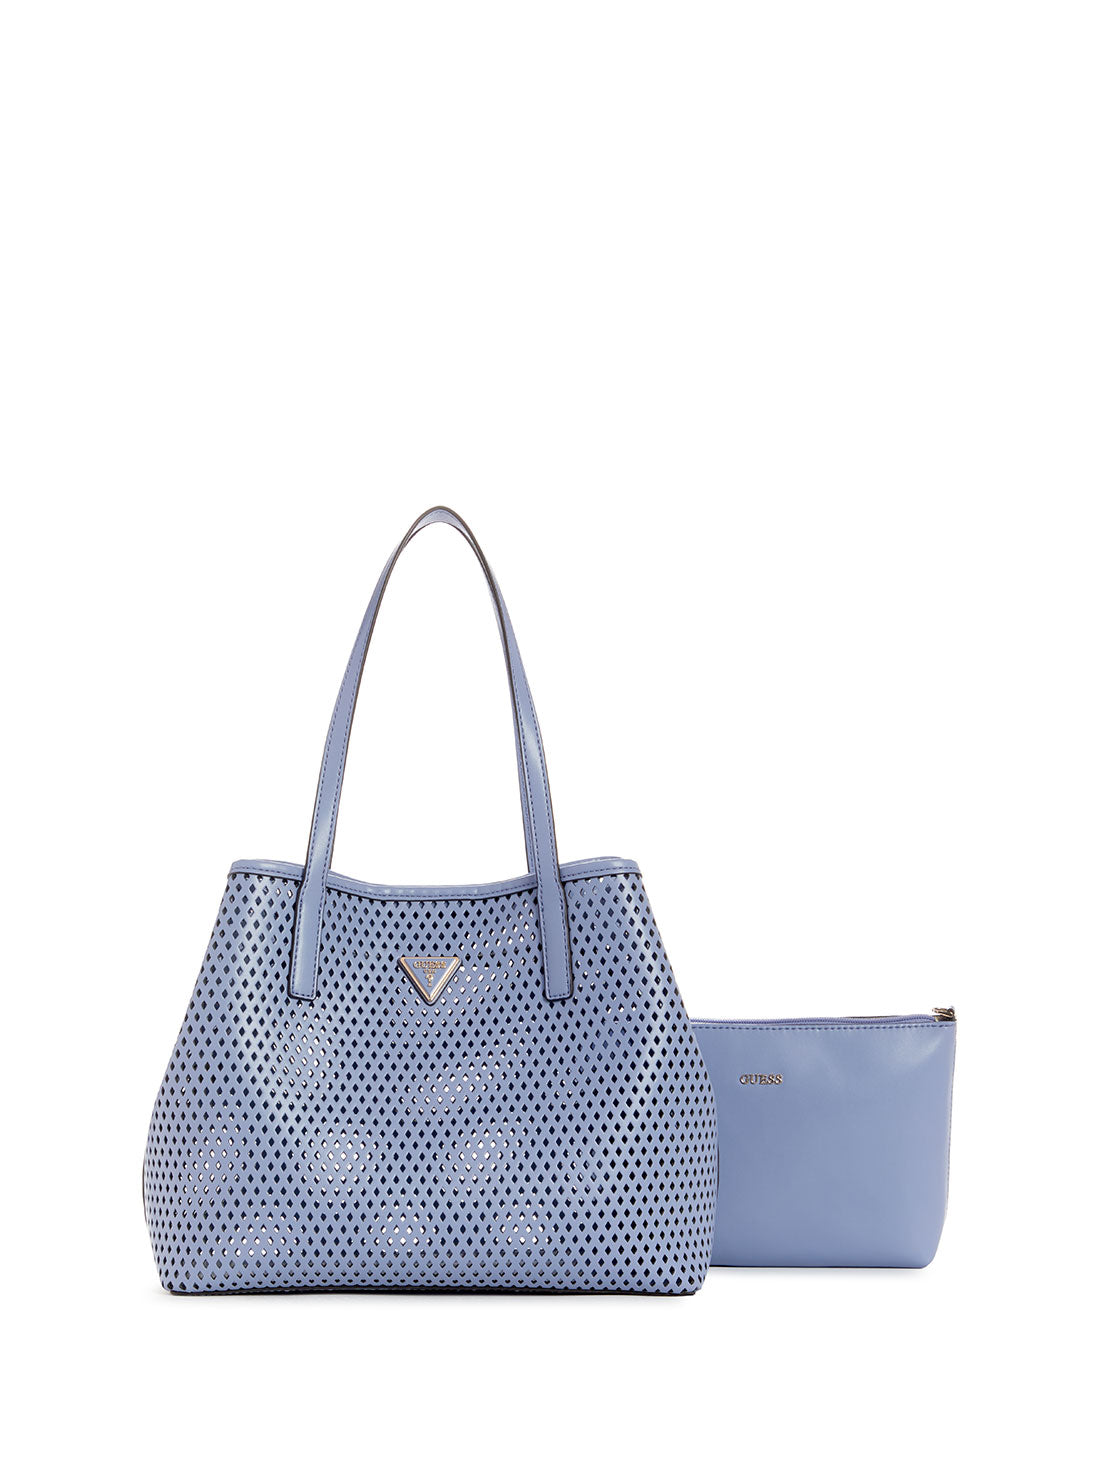 GUESS Women's Wisteria Woven Vikky Tote Bag WP699523 Full View